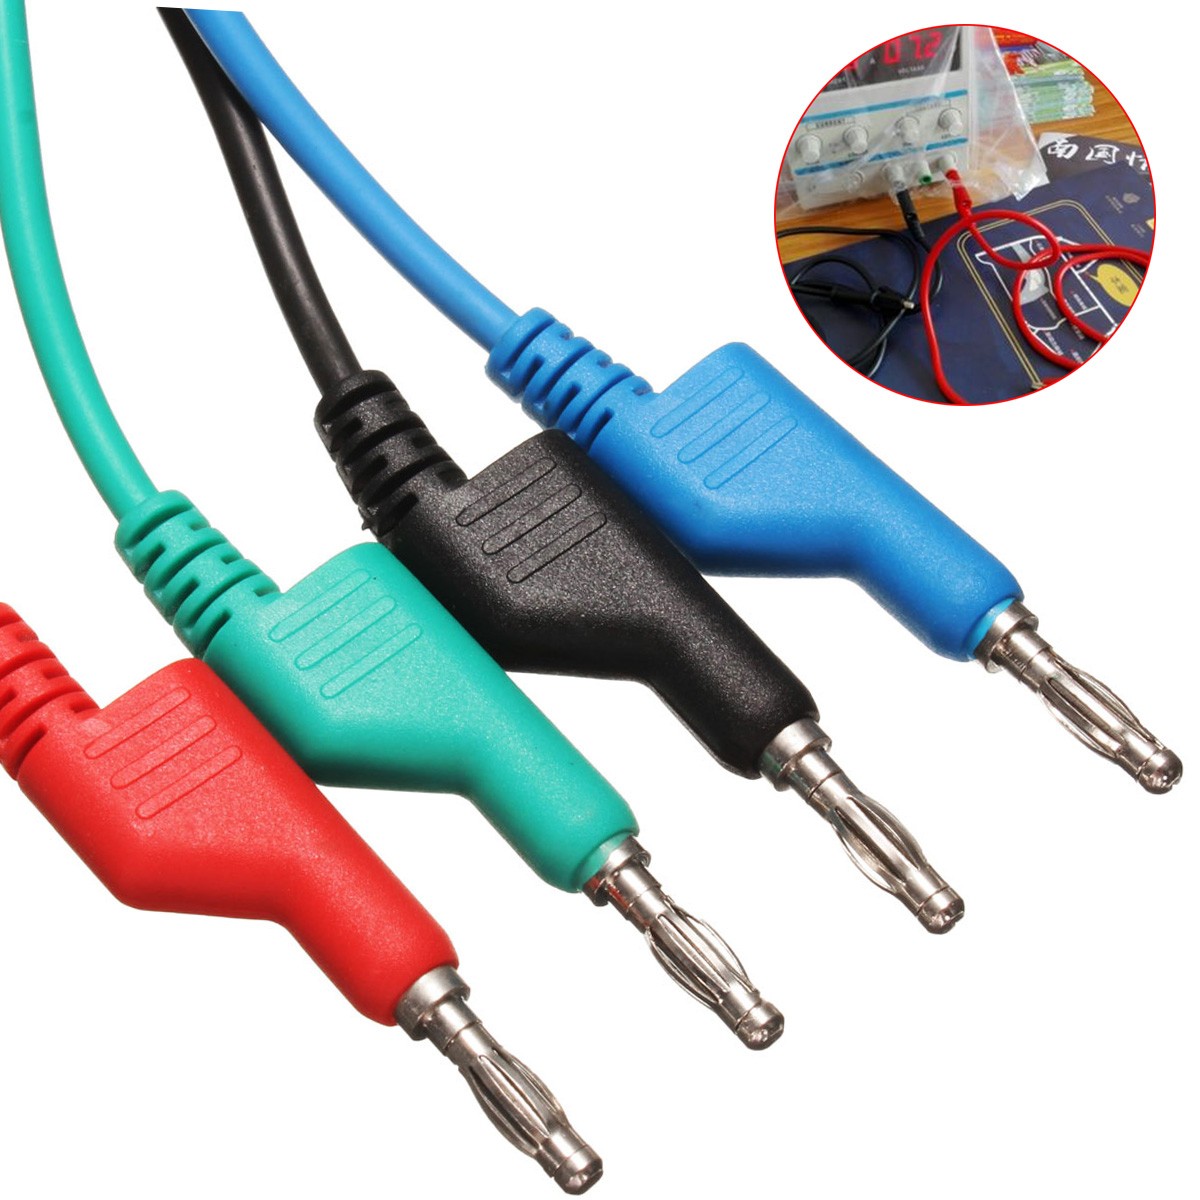 DANIU-4pcs-1M-4mm-Banana-to-Banana-Plug-Soft-Silicone-Test-Cable-Lead-for-Multimeter-4-Colors-1157595-1